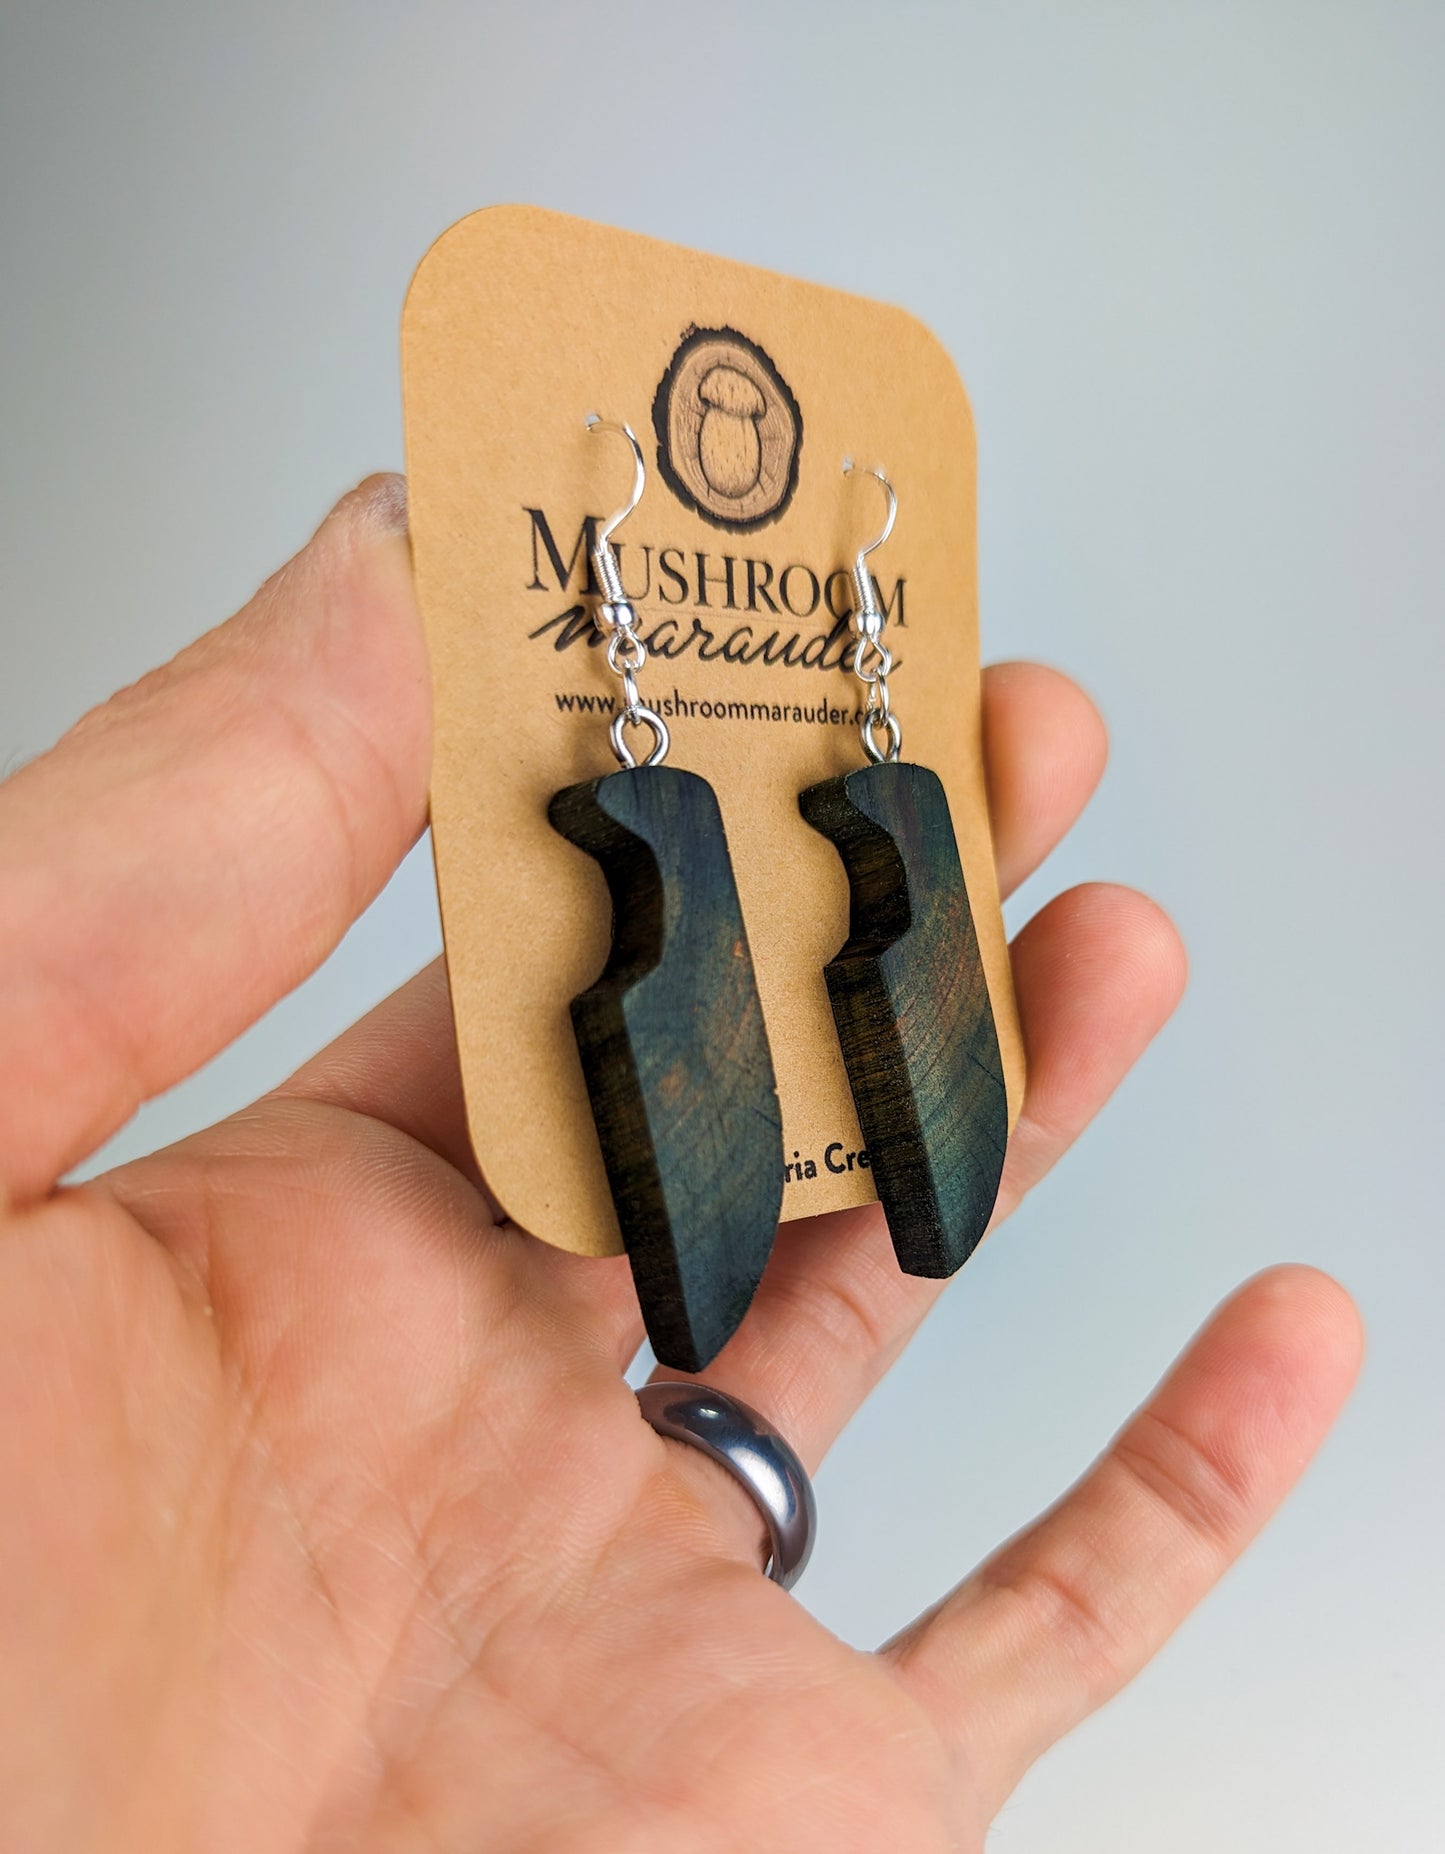 Naturally Fungus Stained Wooden Earrings | Chef Knife Earrings